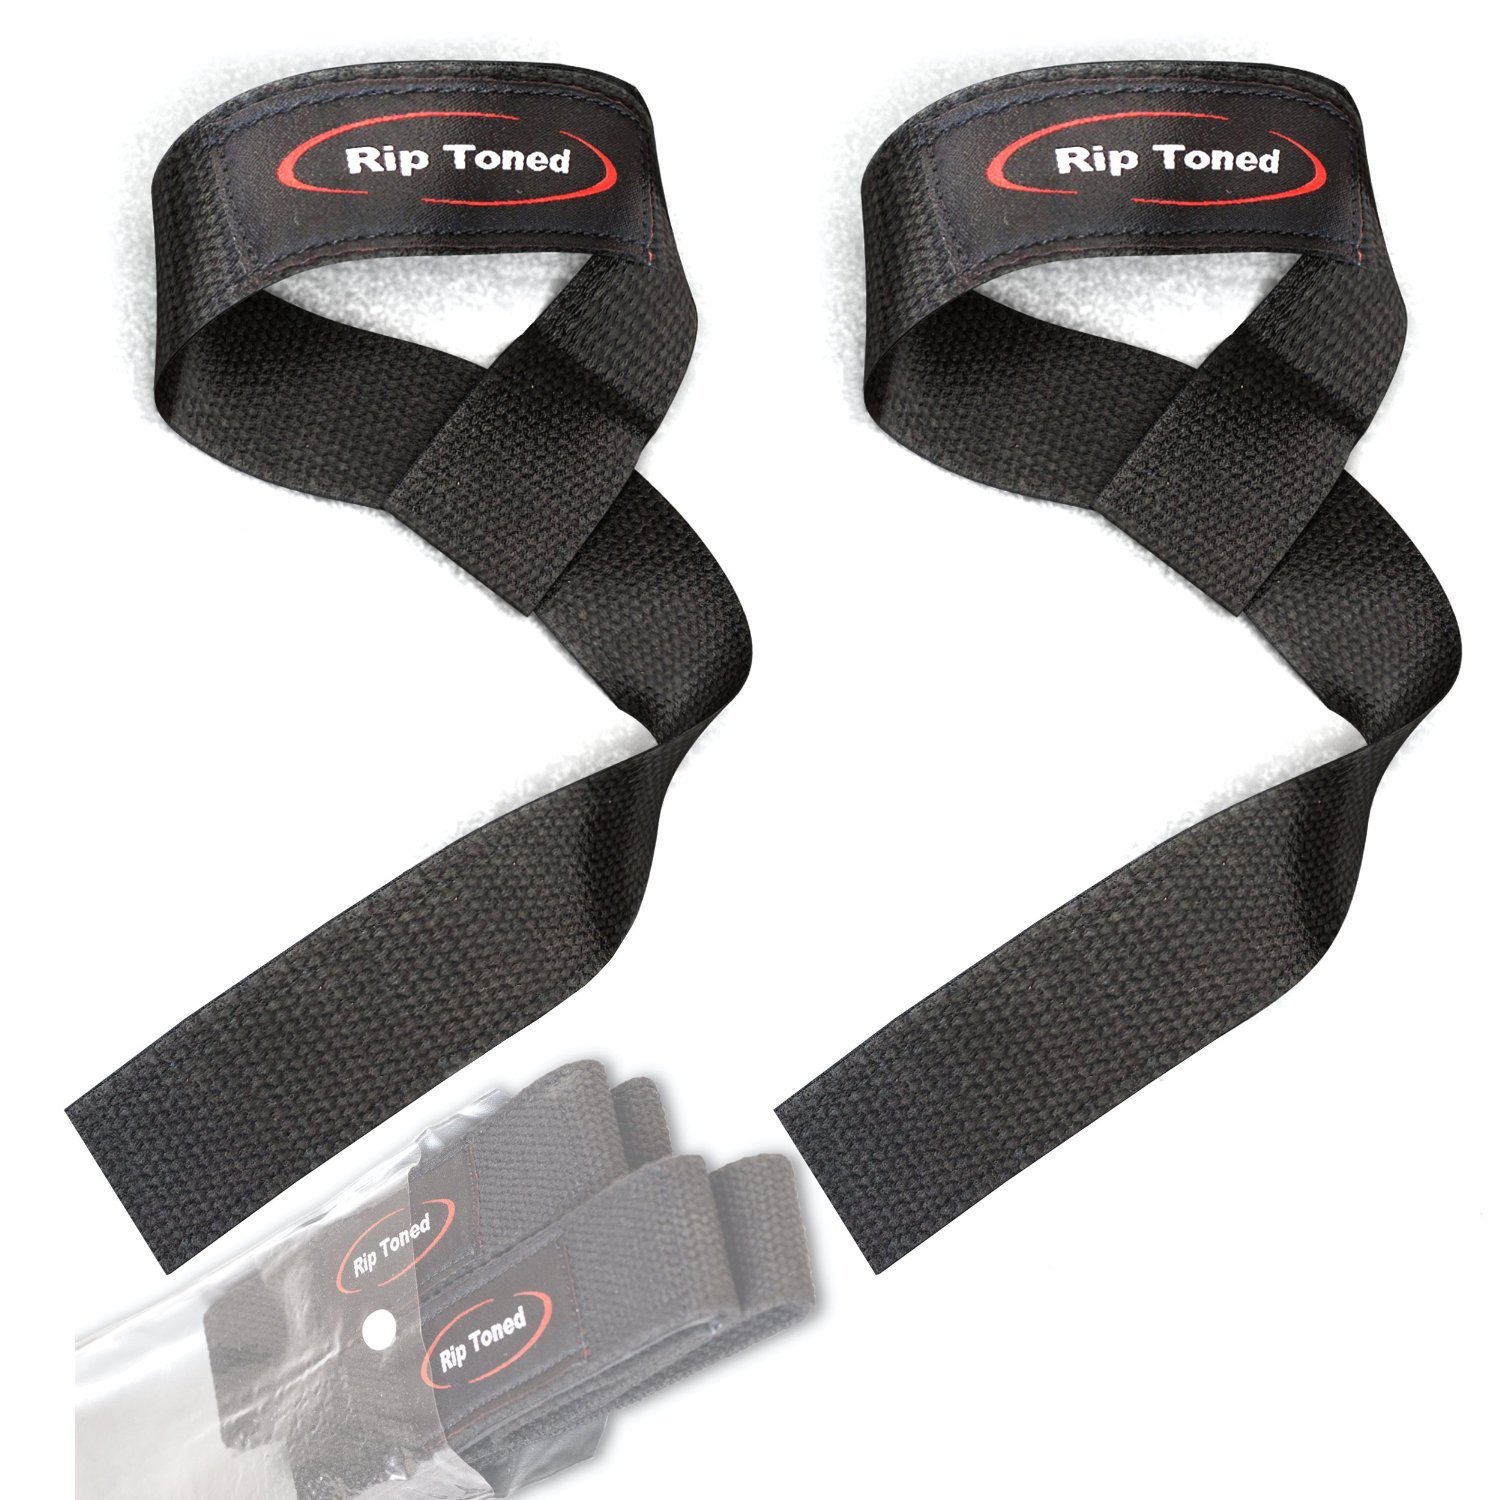 Lift Tech Fitness Unisex's Padded Cotton Lift Straps Size 21.5-Inch Grey 